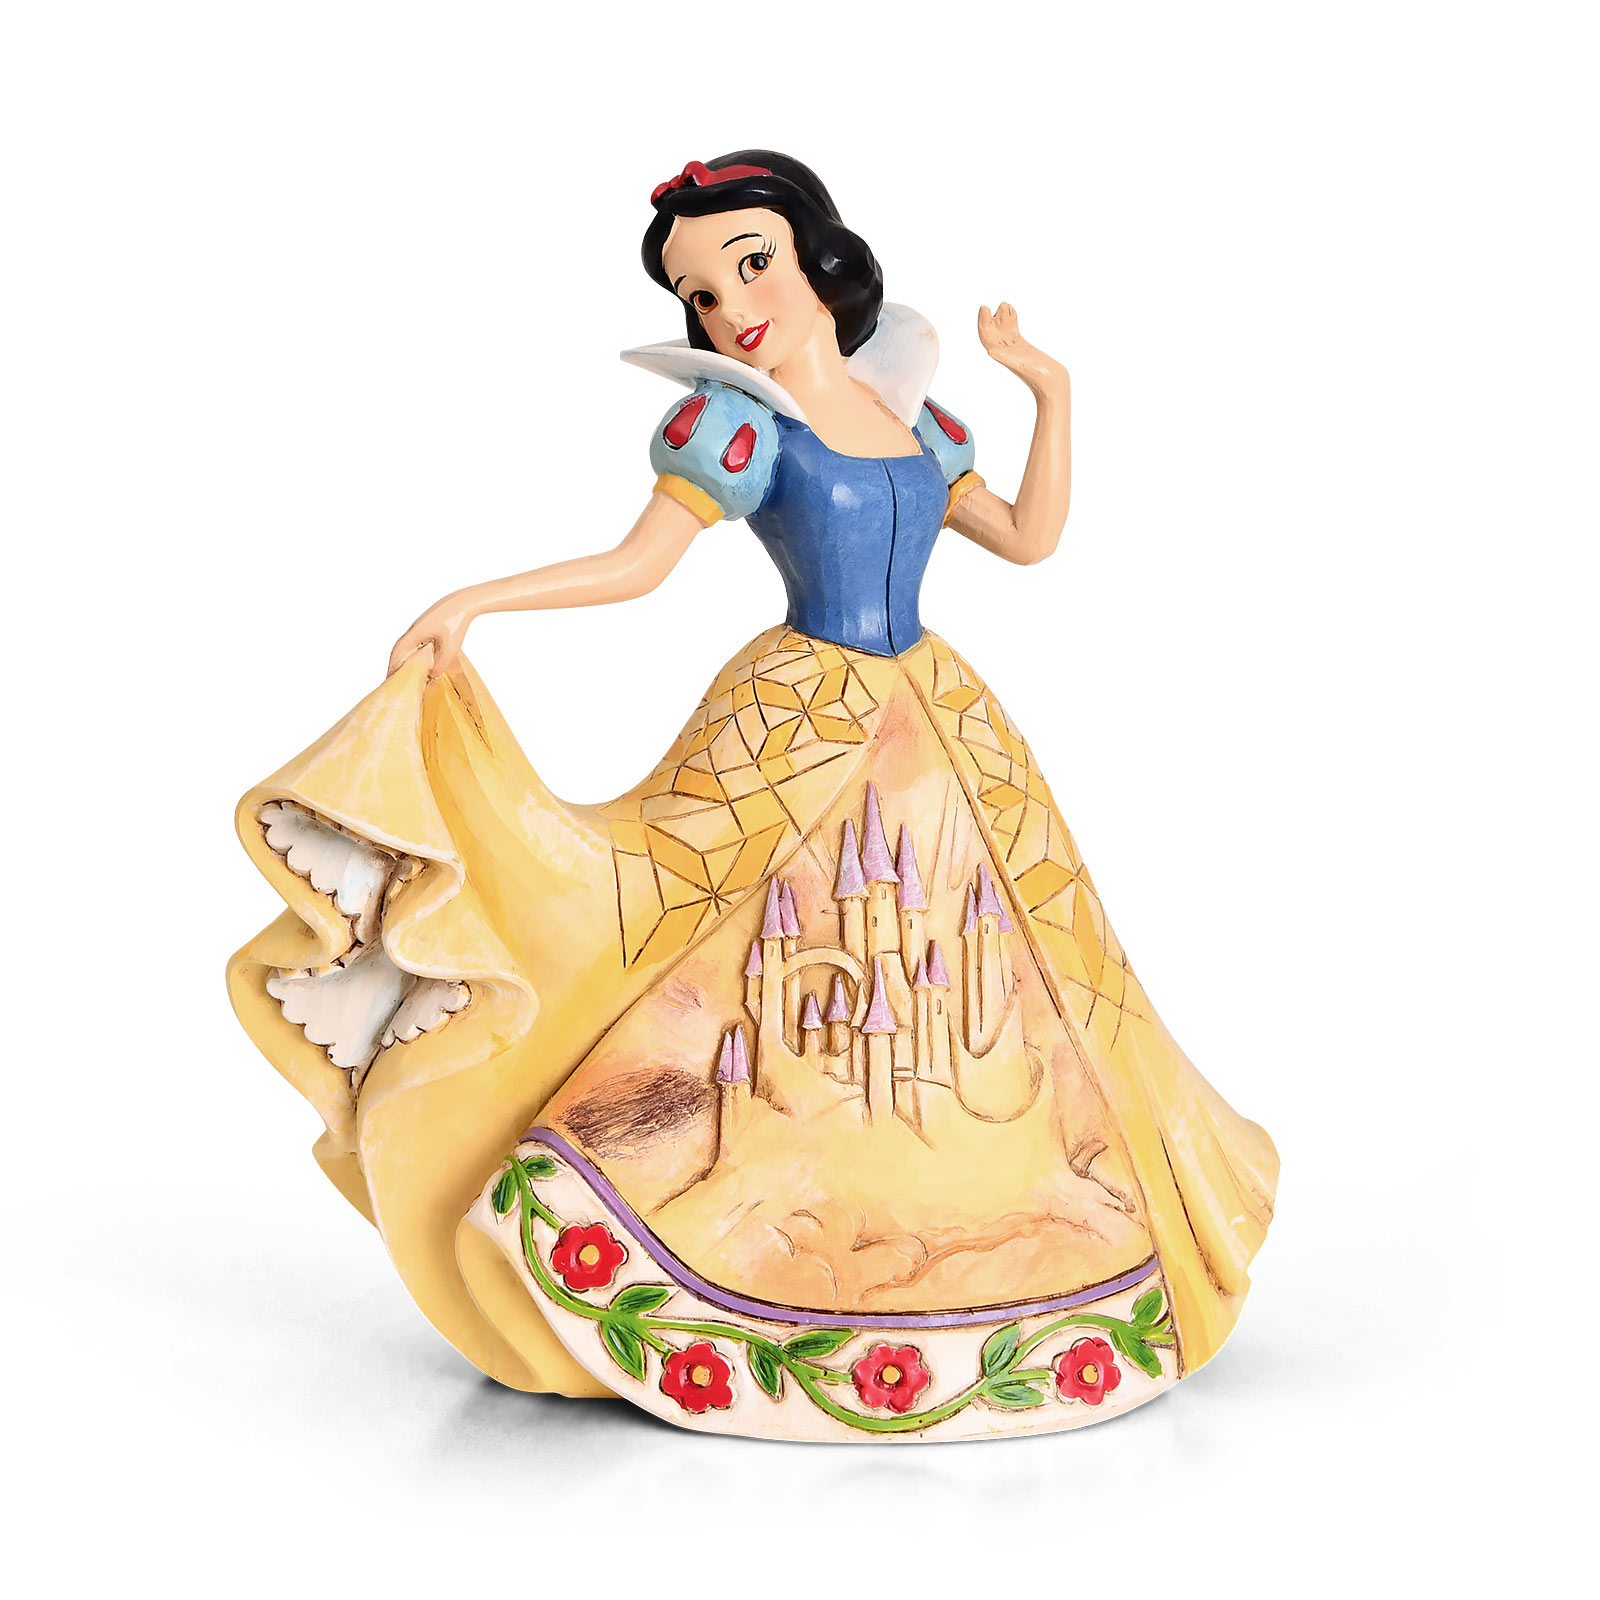 Snow White - Castle in the Clouds figure